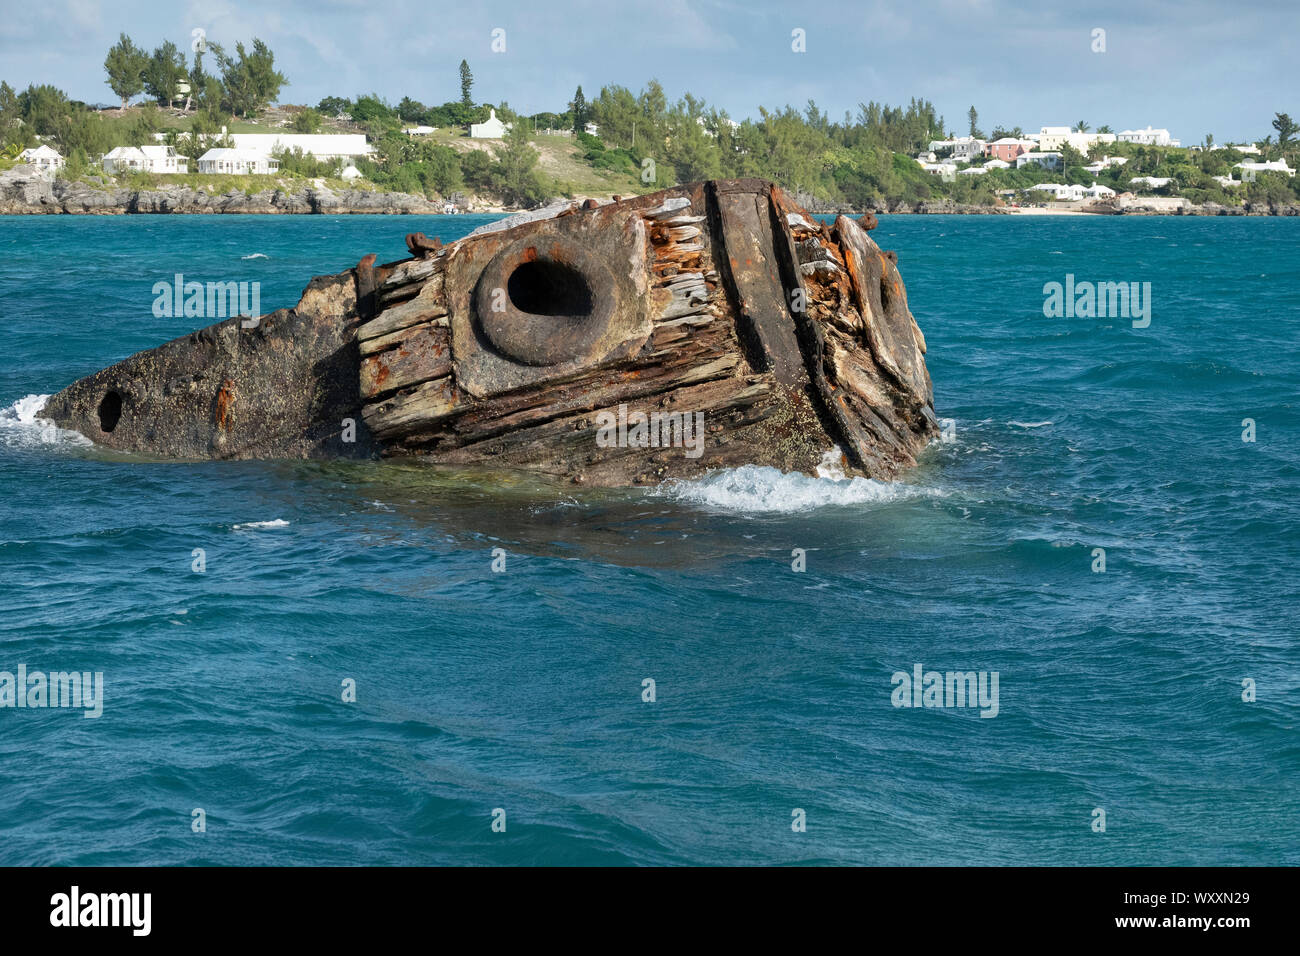 Shipwreck of HMS Vixen in Bermuda waters with the prow remaining on the surface Stock Photo